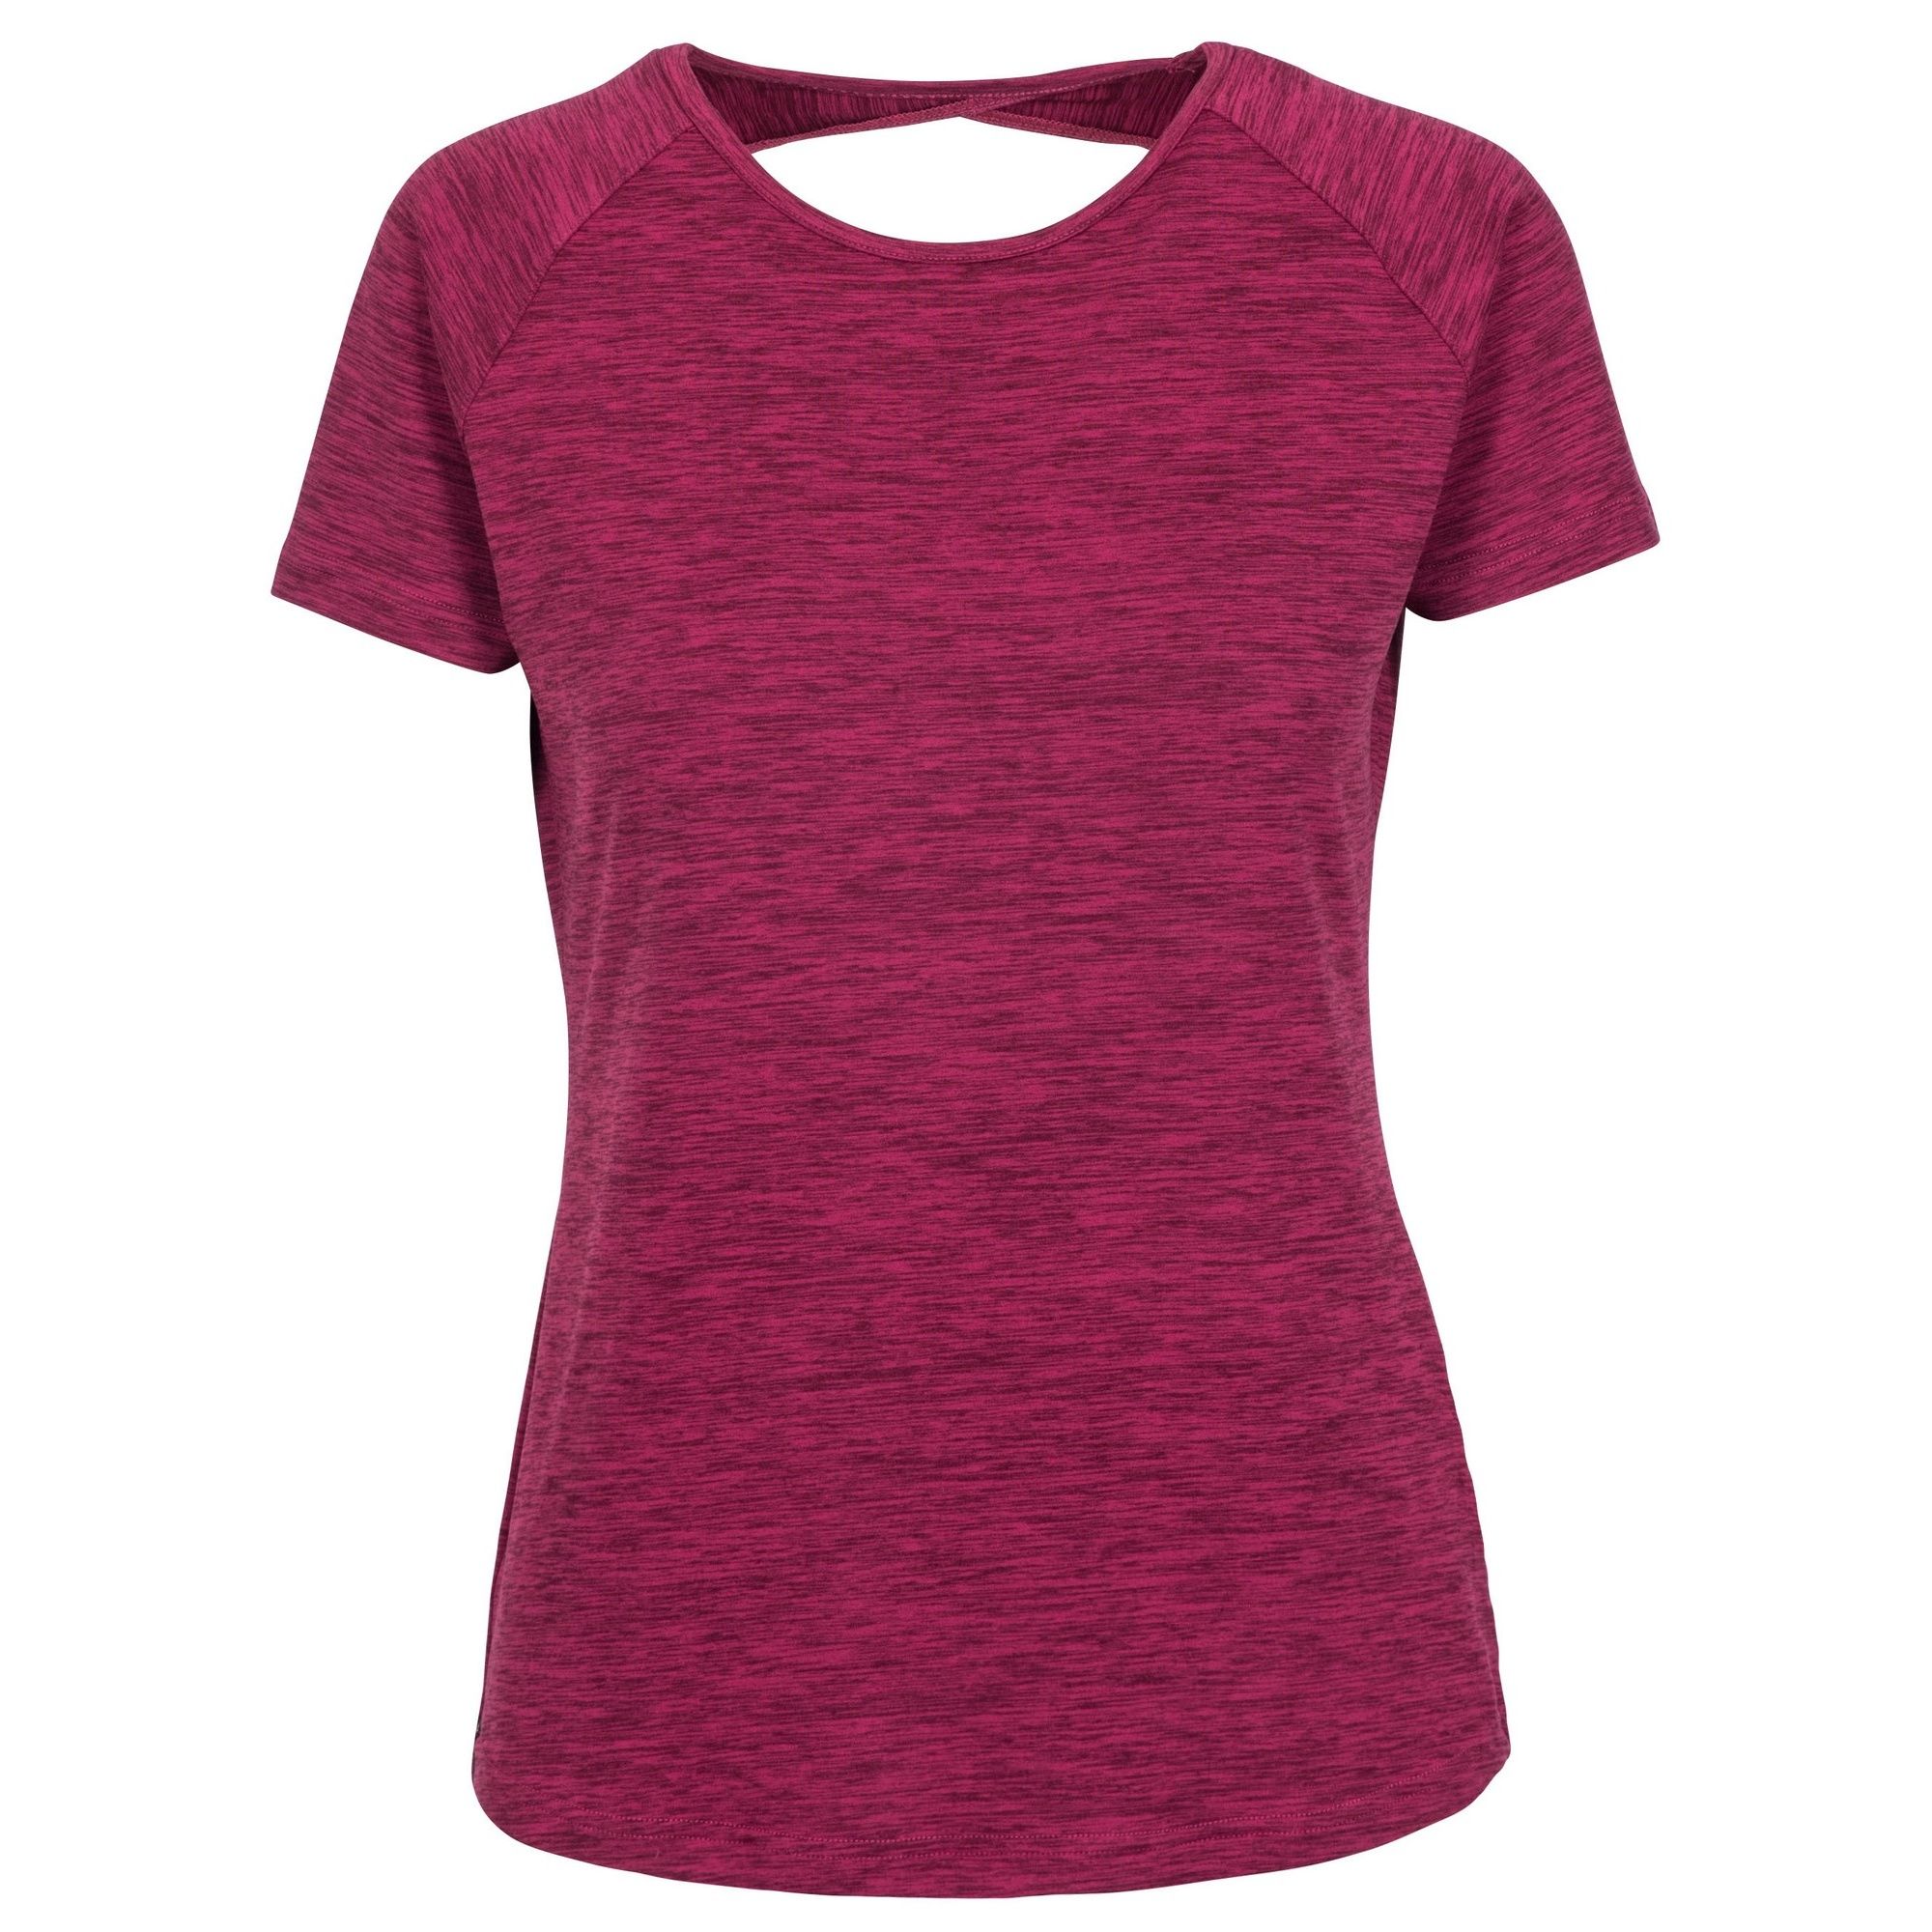 93% Polyester, 7% Elastane. Short sleeves. Round neck. Crossover detail at back. Antibacterial. Quick dry. Trespass Womens Chest Sizing (approx): XS/8 - 32in/81cm, S/10 - 34in/86cm, M/12 - 36in/91.4cm, L/14 - 38in/96.5cm, XL/16 - 40in/101.5cm, XXL/18 - 42in/106.5cm.